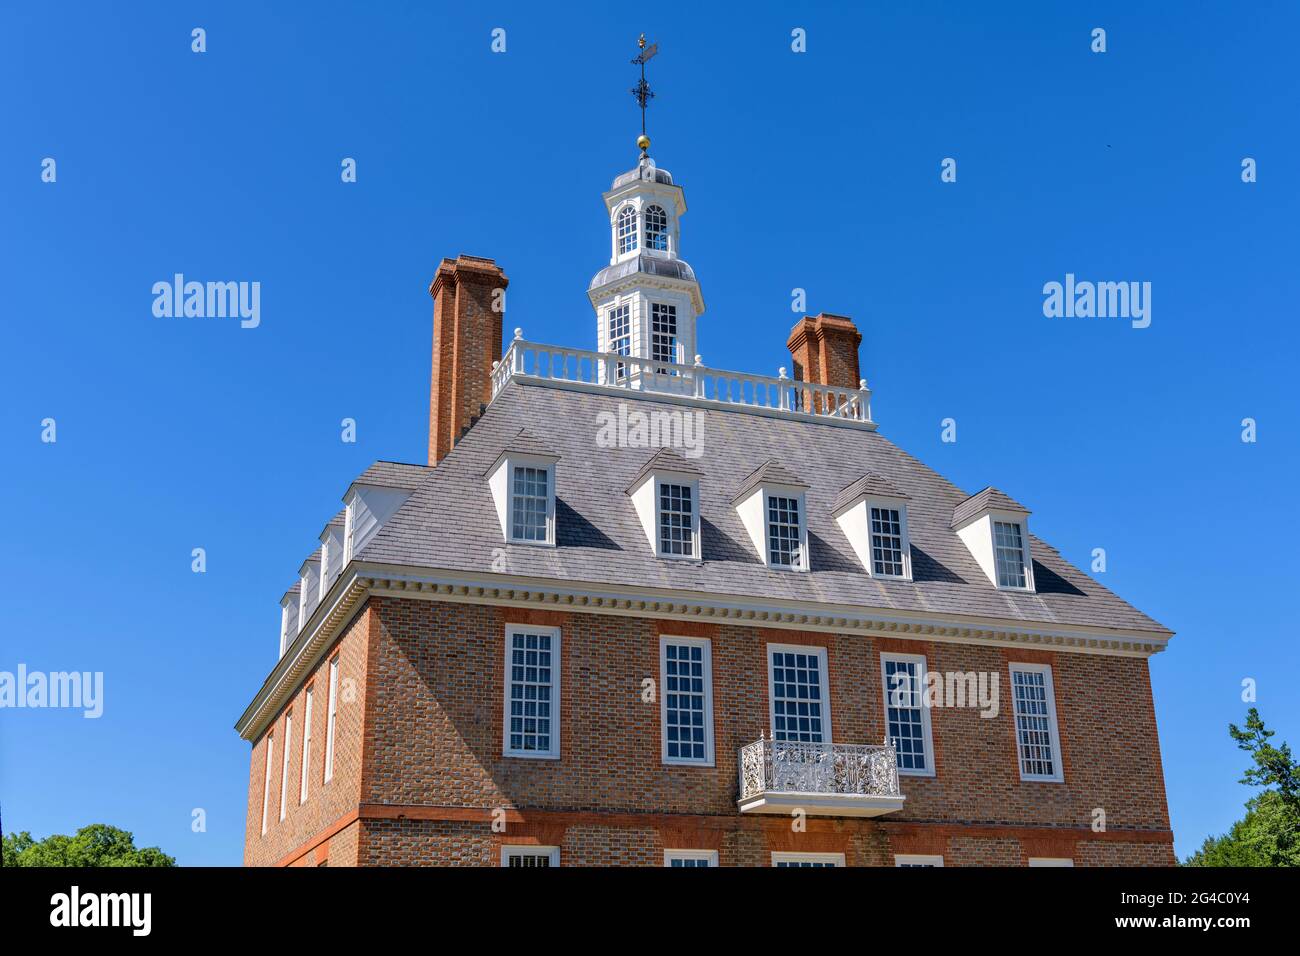 Governor's Palace - A close-up view of the upper façade and bell tower of the Governor's Palace, Williamsburg, Virginia, USA. Stock Photo